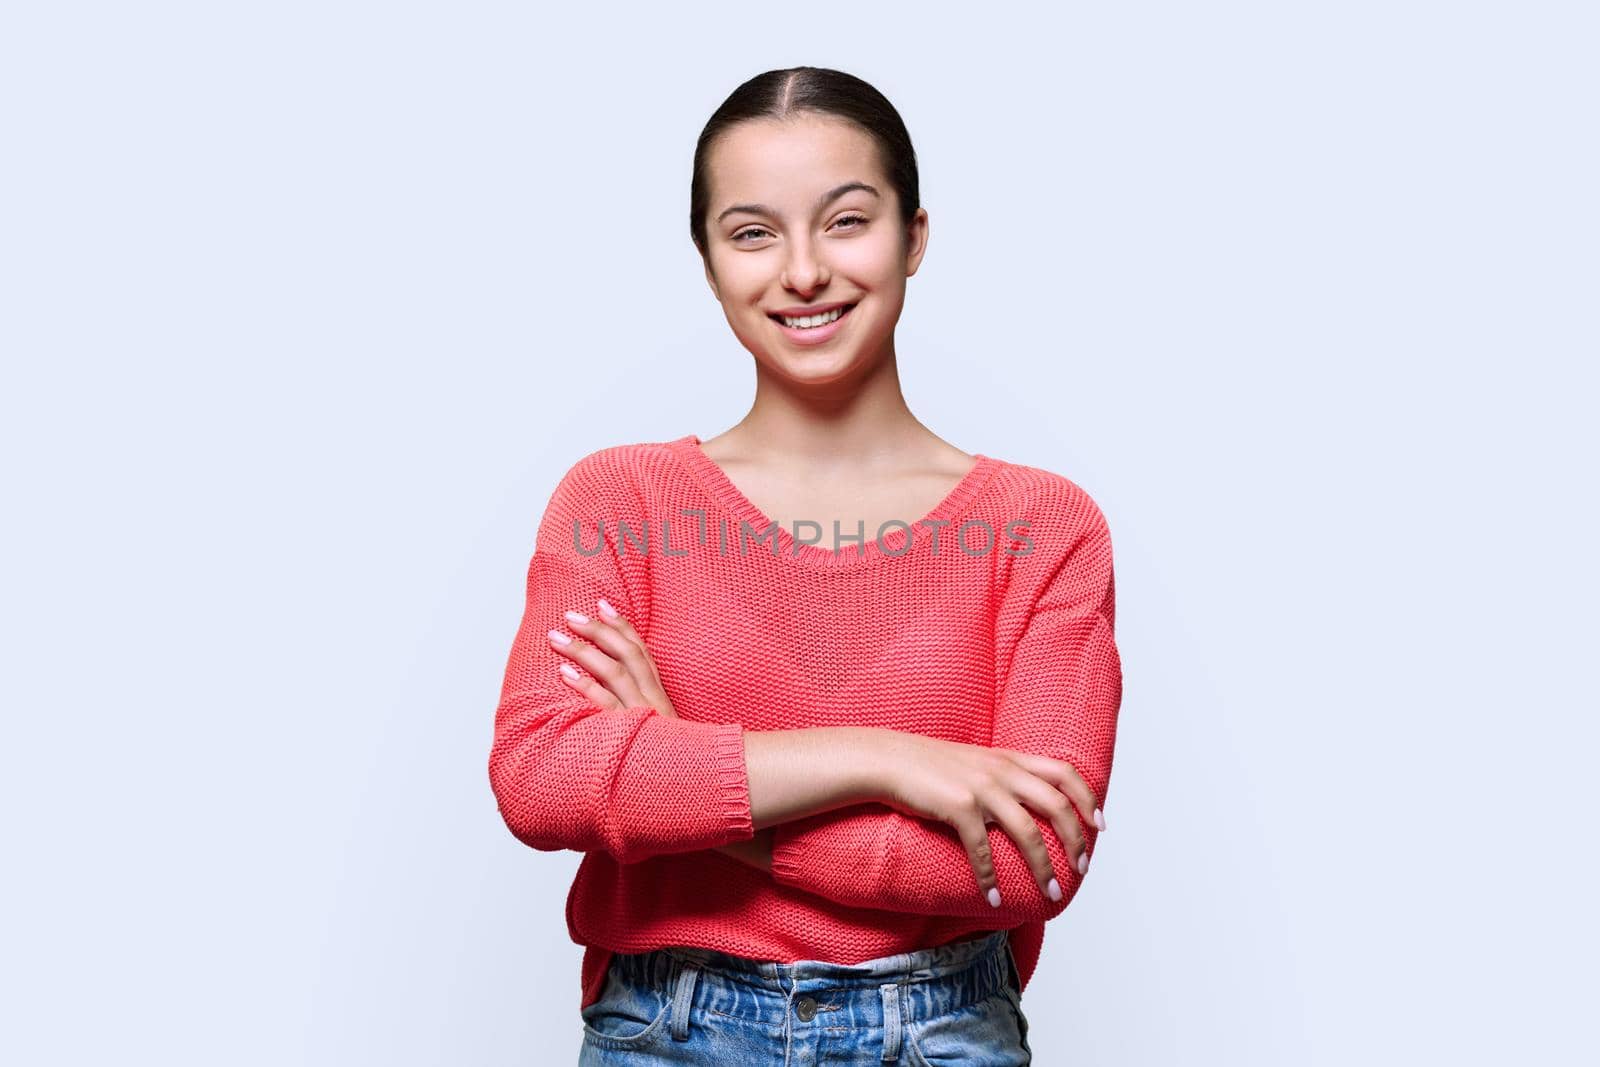 Portrait of teenage smiling female looking at camera on light studio background. Confident teen girl with crossed arms in red. Adolescence, high school, youth 15, 16 years old concept